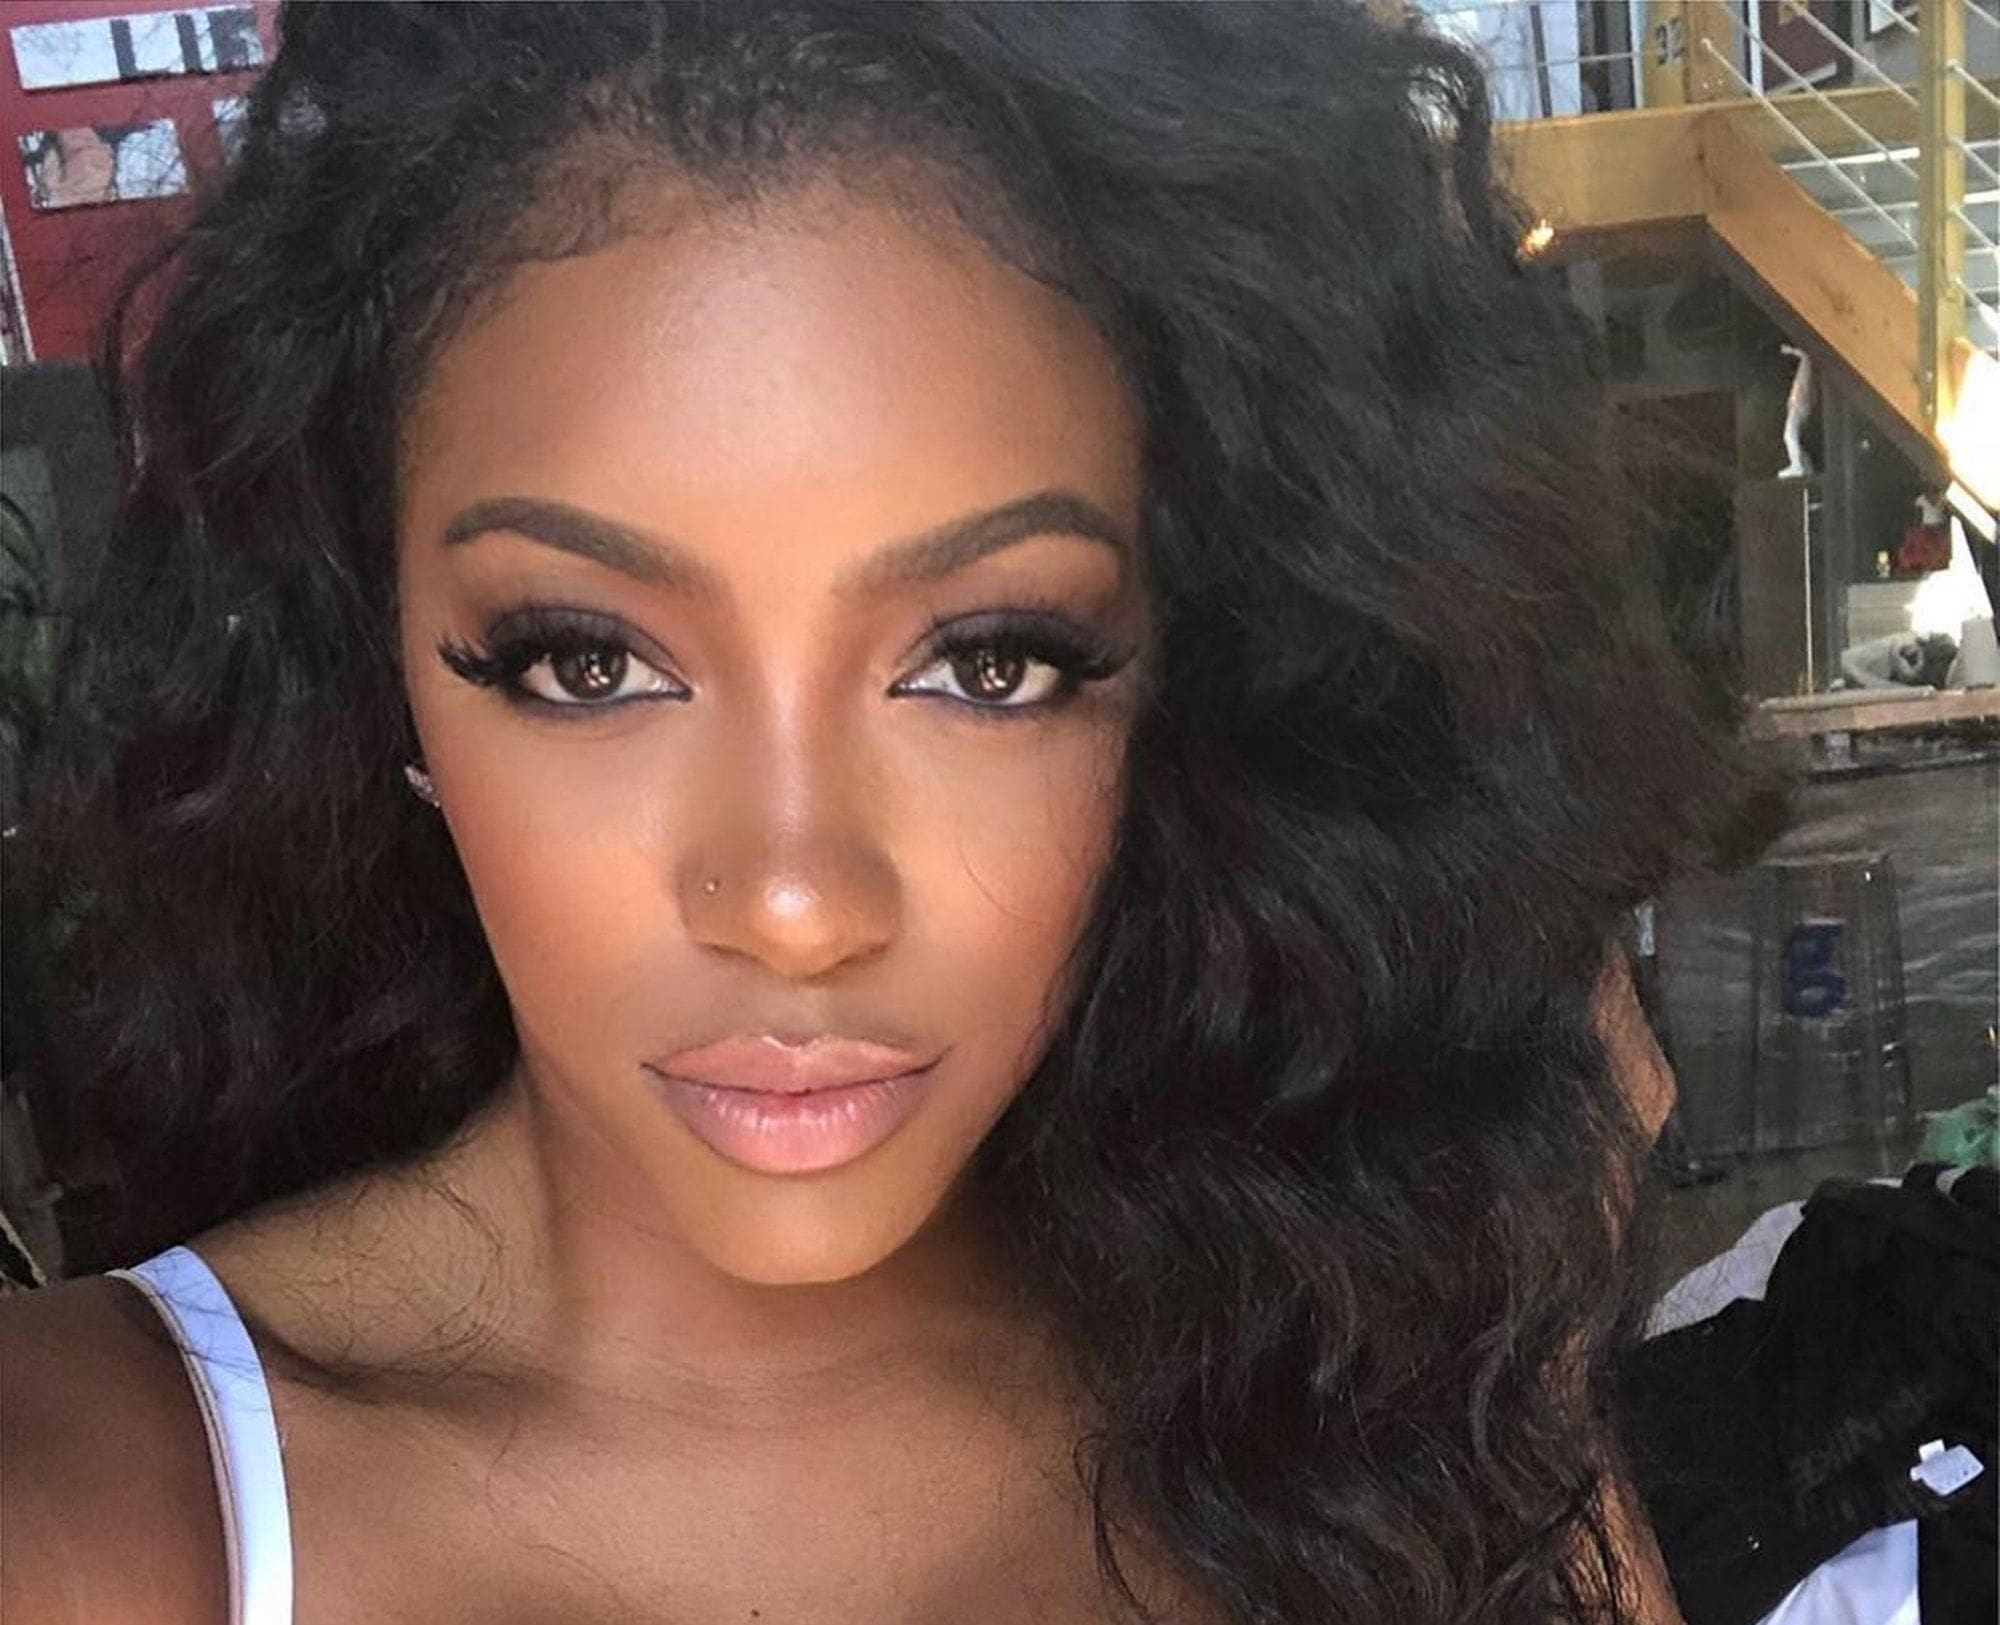 Porsha Williams Reveals Fans The Sweetest Photo She's Ever Seen- It's With Her Fiance And Daughter